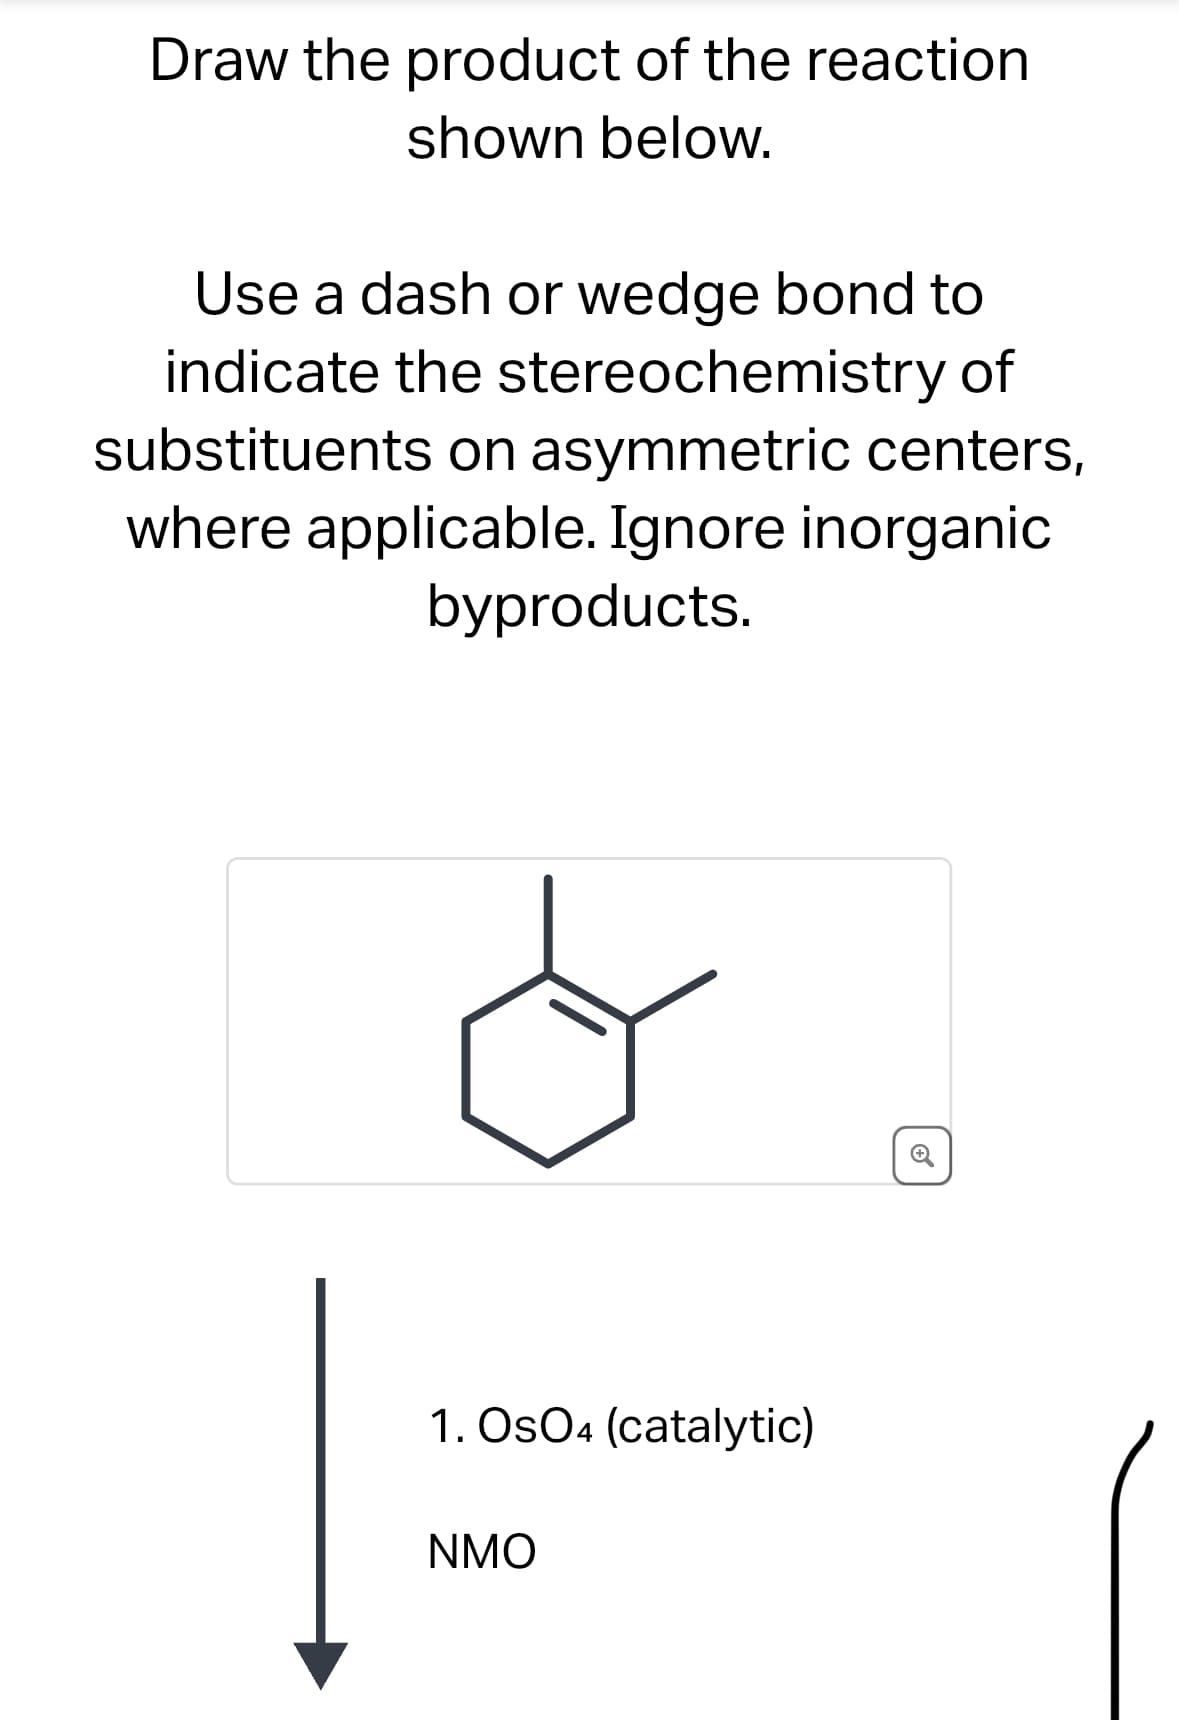 Draw the product of the reaction
shown below.
Use a dash or wedge bond to
indicate the stereochemistry of
substituents on asymmetric centers,
where applicable. Ignore inorganic
byproducts.
C
1. OsO4 (catalytic)
NMO